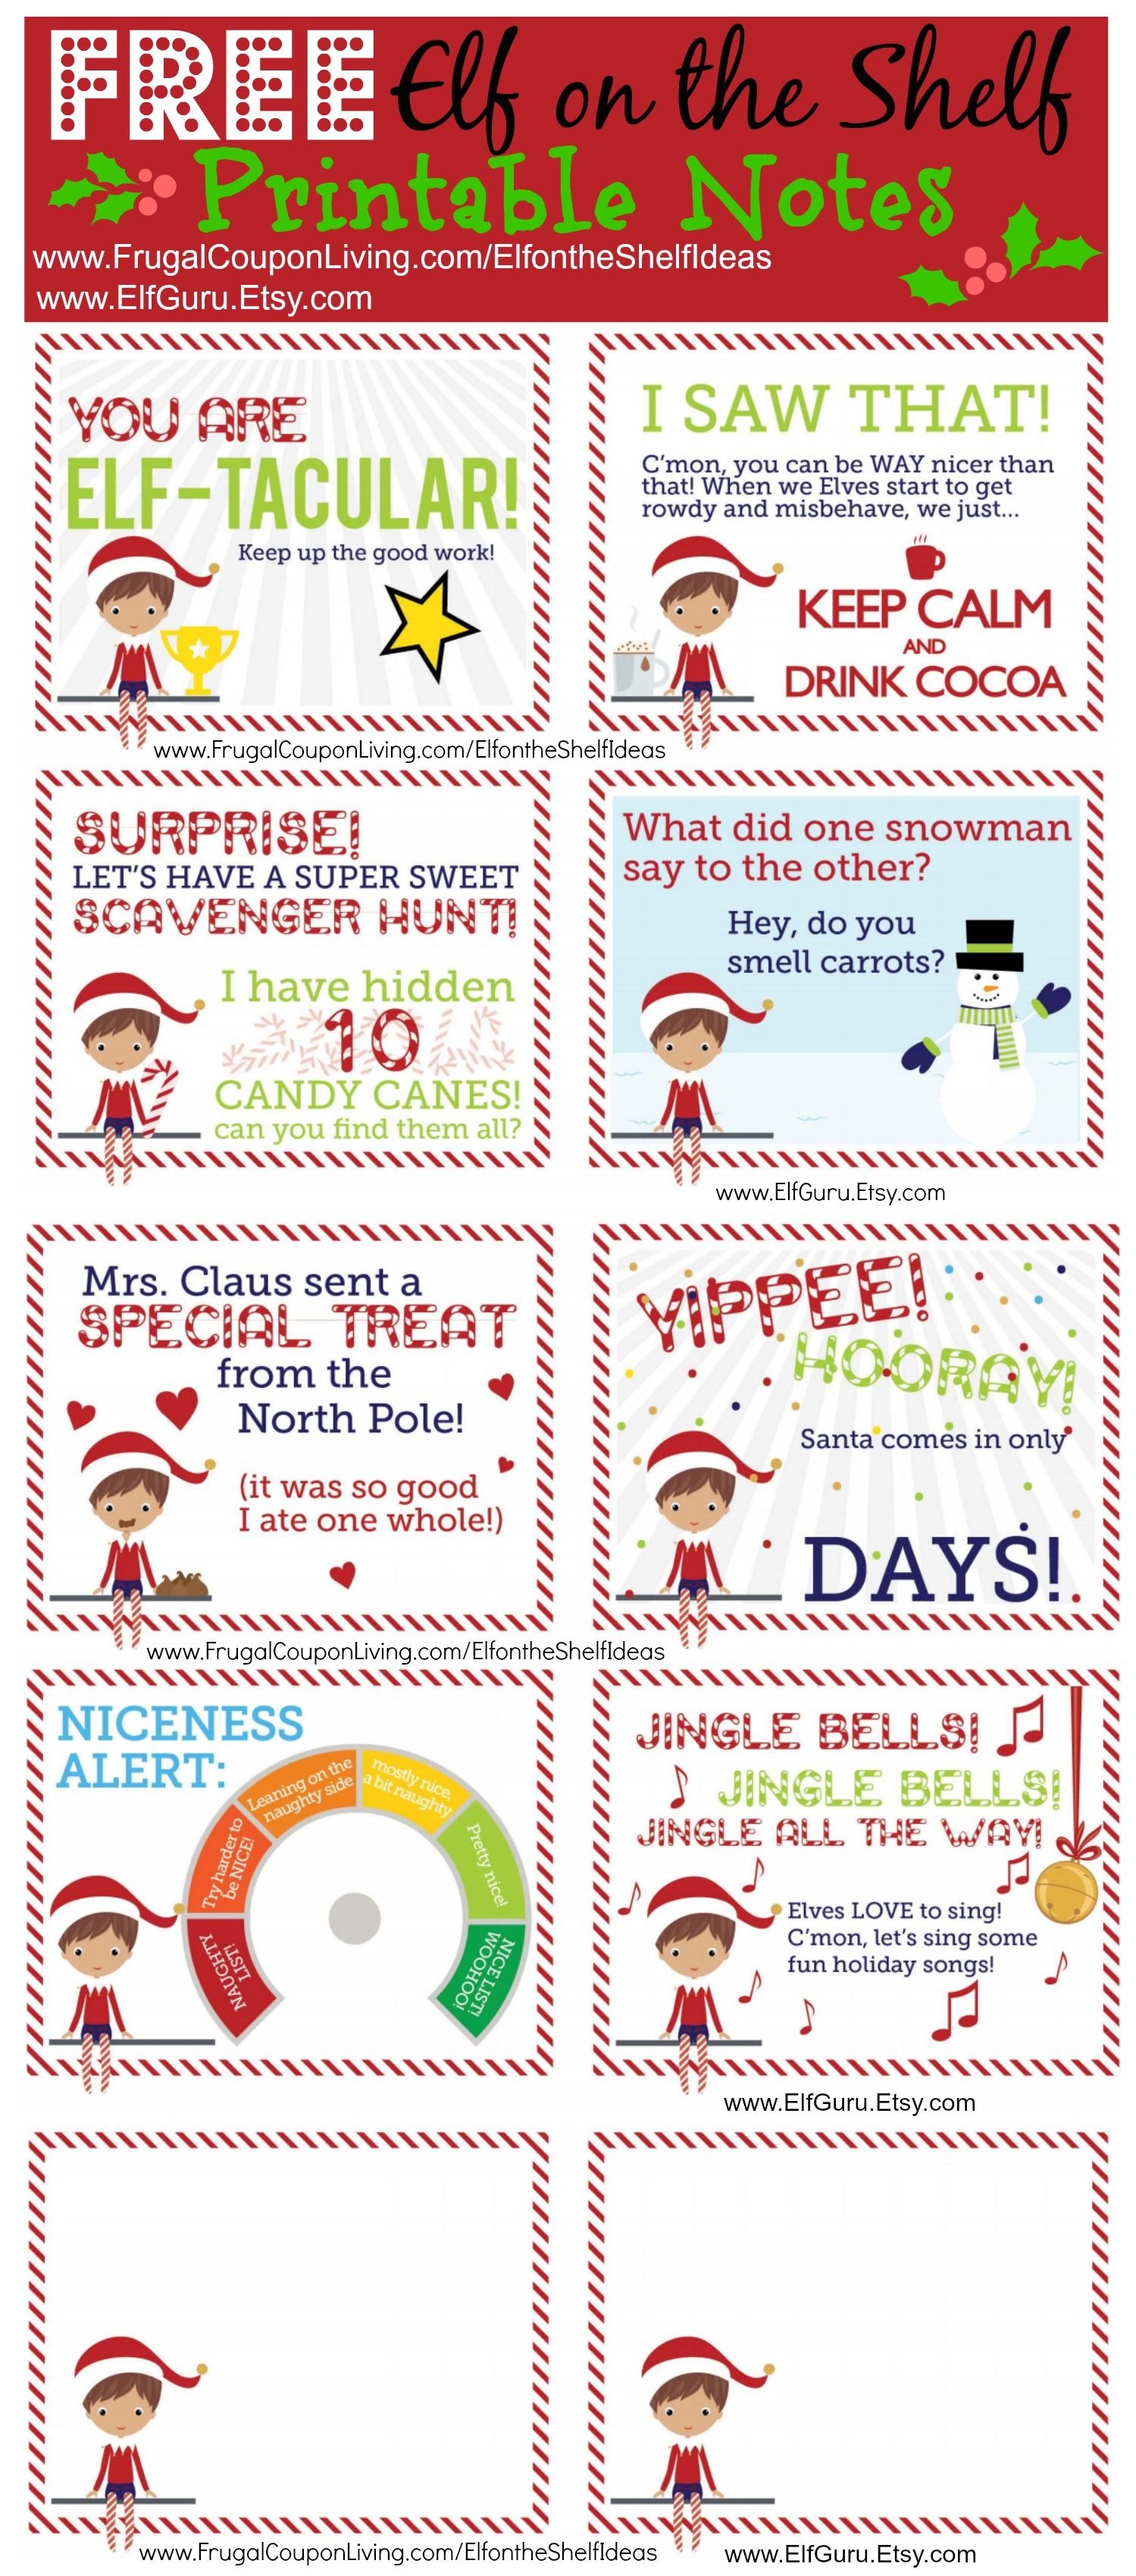 Free Elf On The Shelf Notes. | Holiday: Elf On The Shelf Ideas | Elf - Free Printable Elf On The Shelf Notes